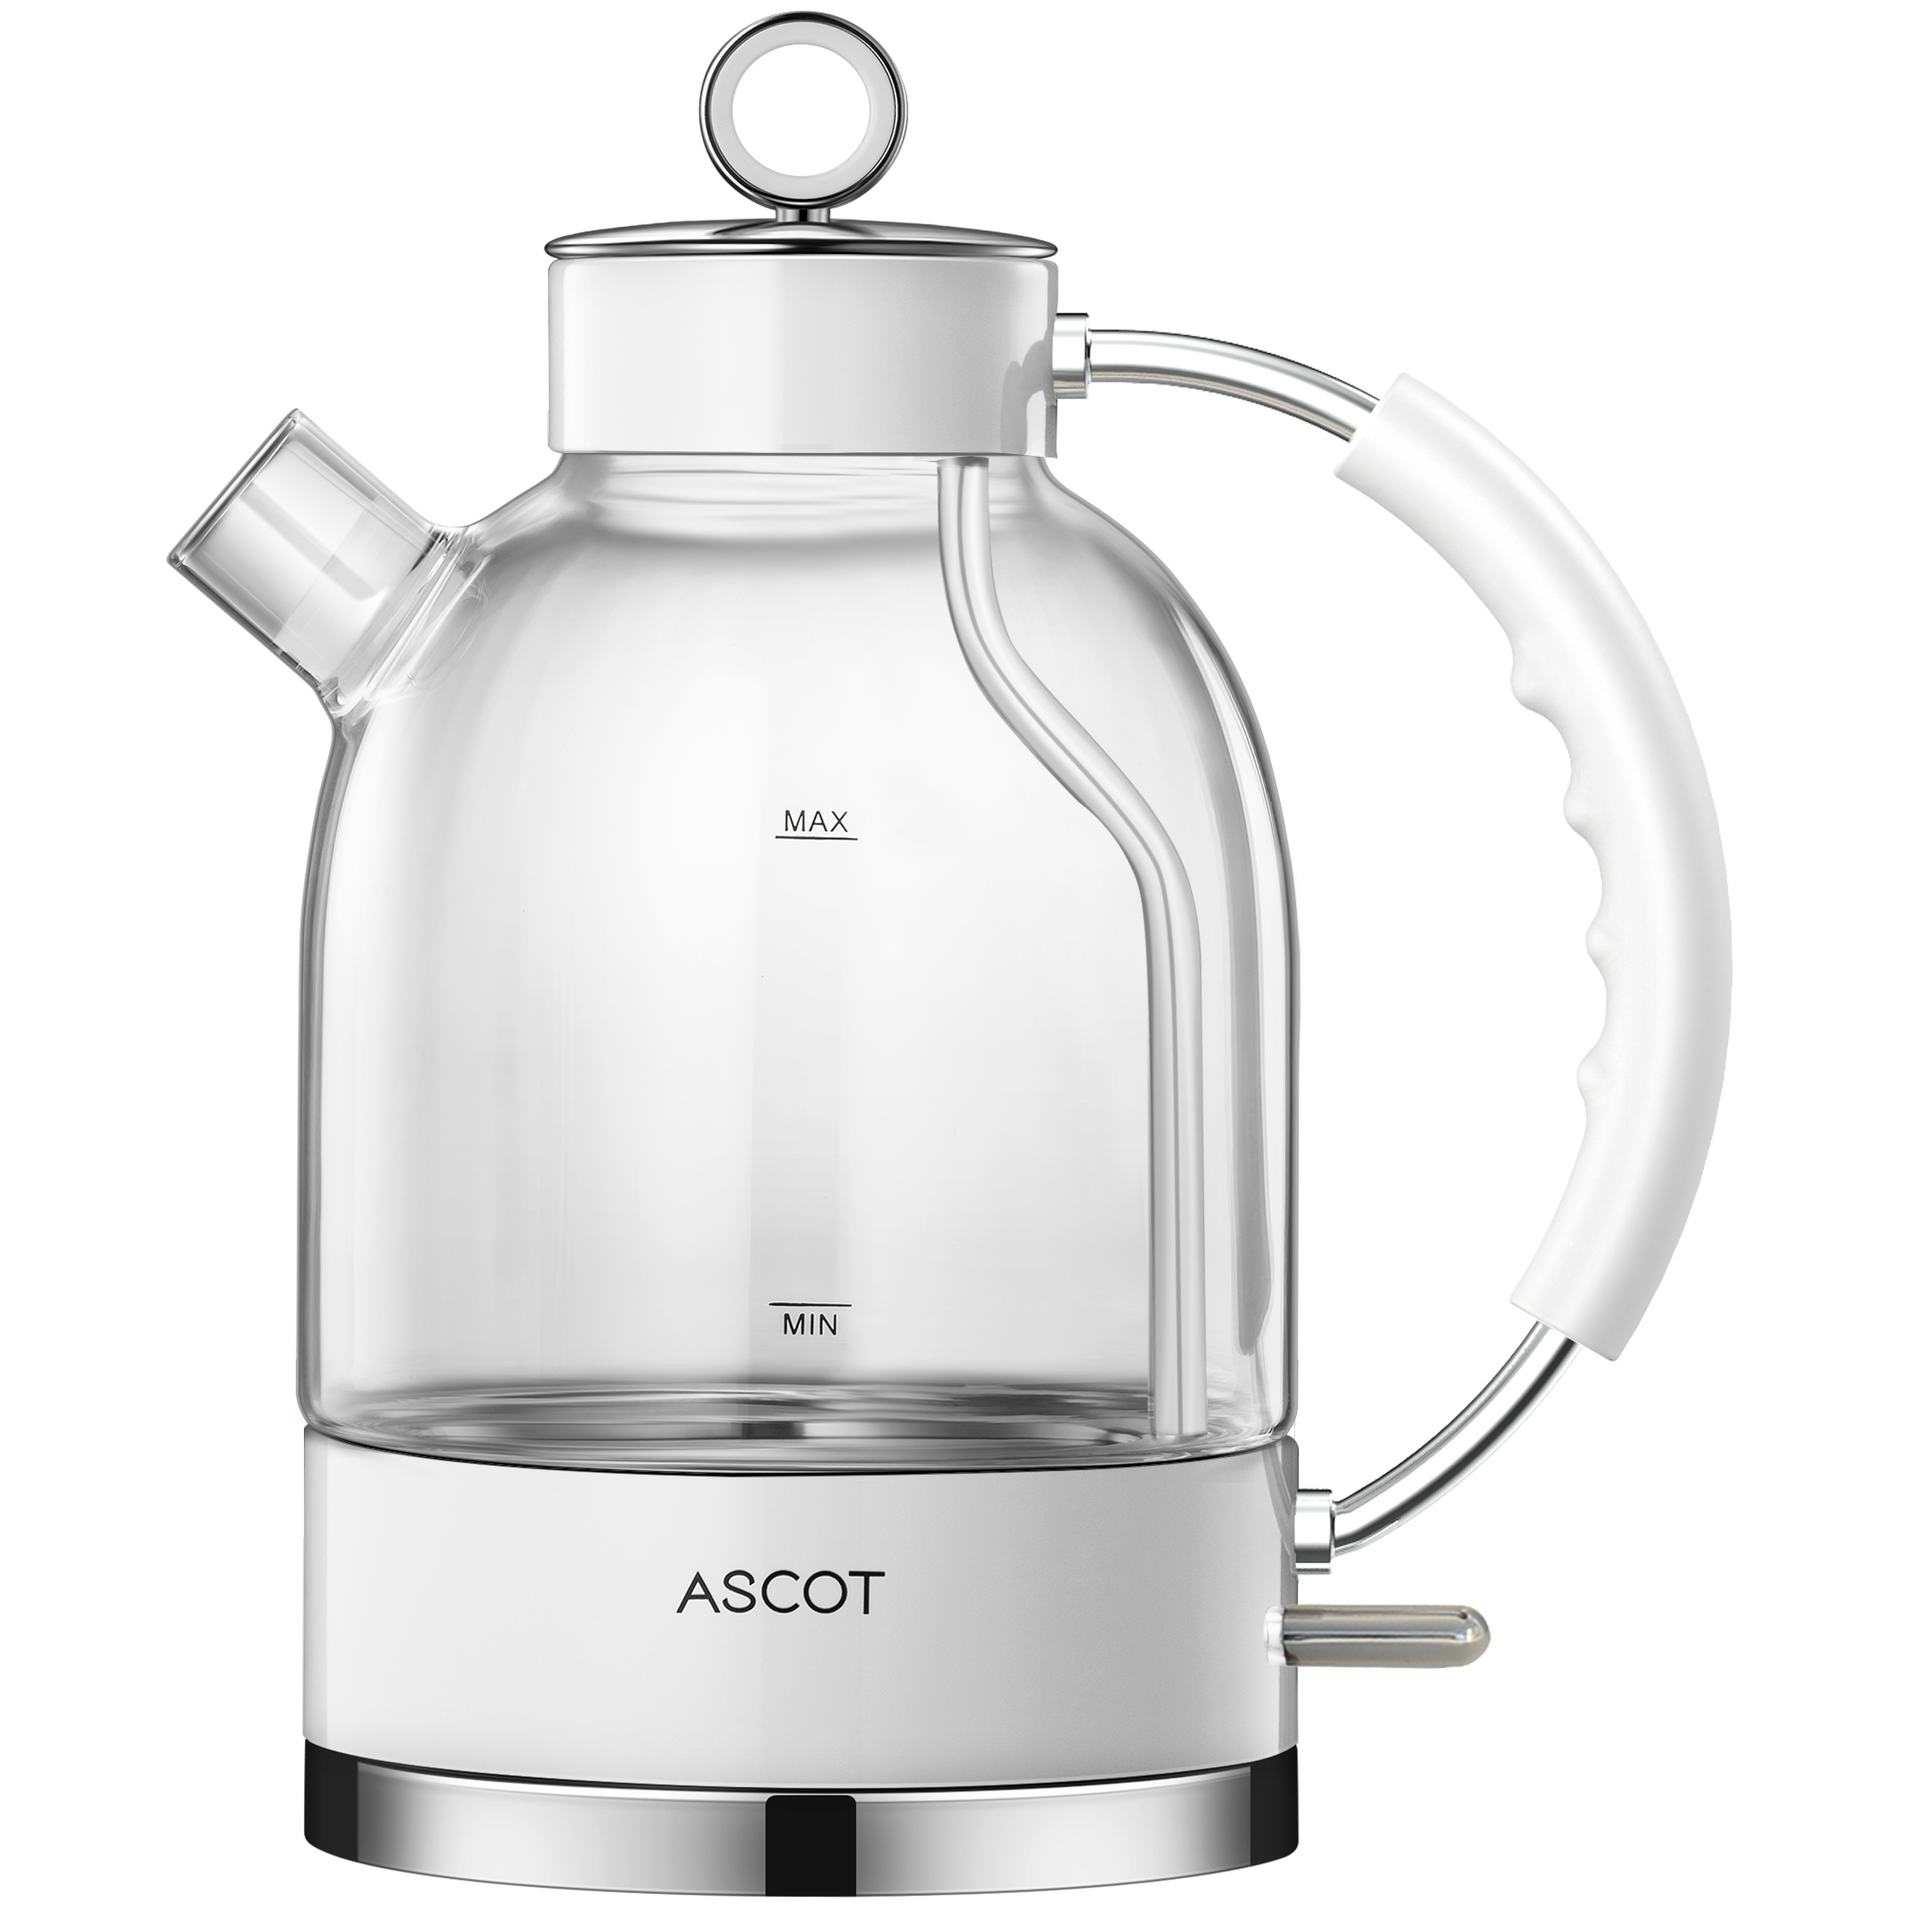 Ascot Electric Kettle,and Best! Also comes in retro stainless